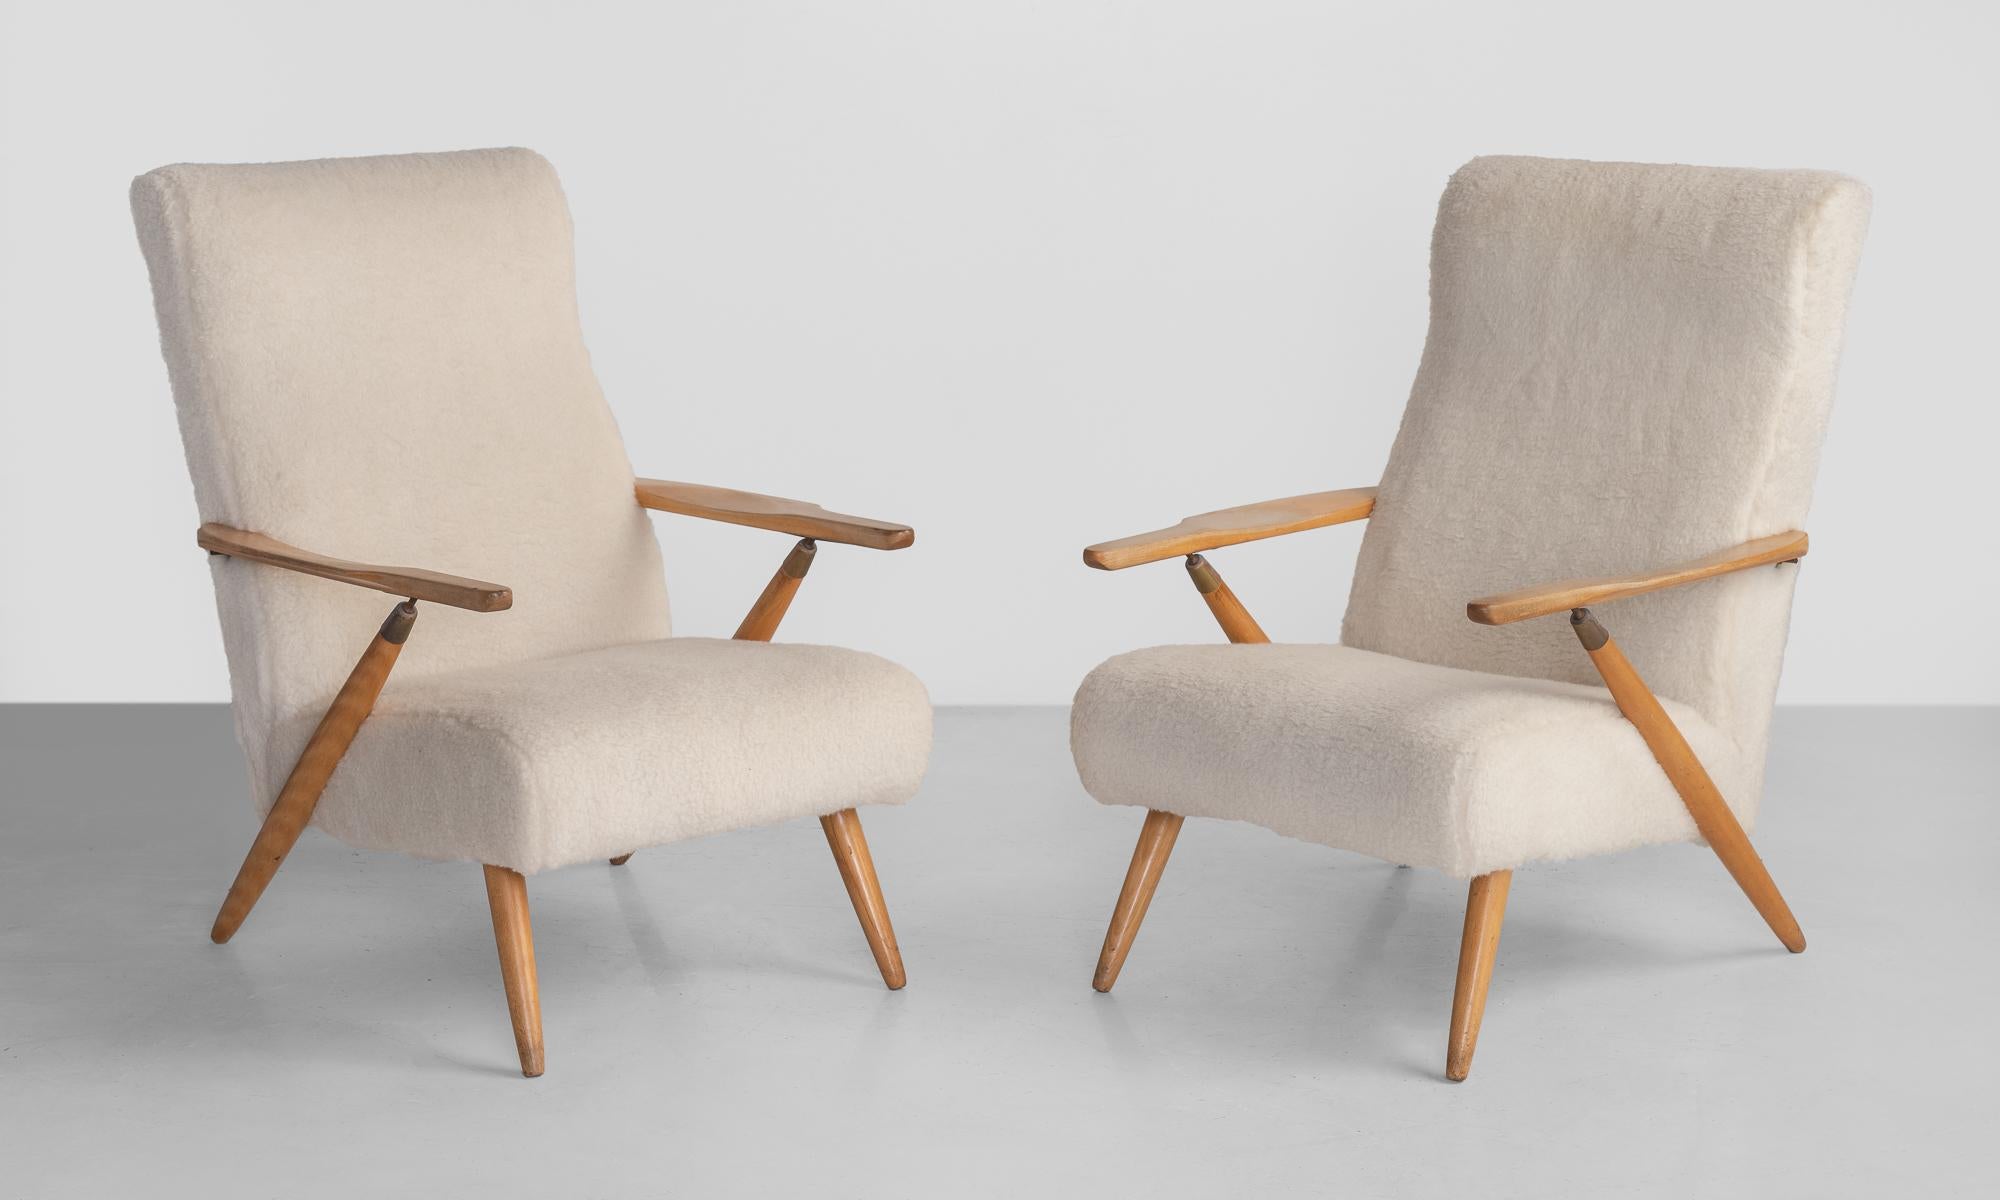 Pair of shearling lounge chairs, France, circa 1950.

Reclinable form in white shearling upholstery, in the style of Carlo Mollino.

Measures: 33